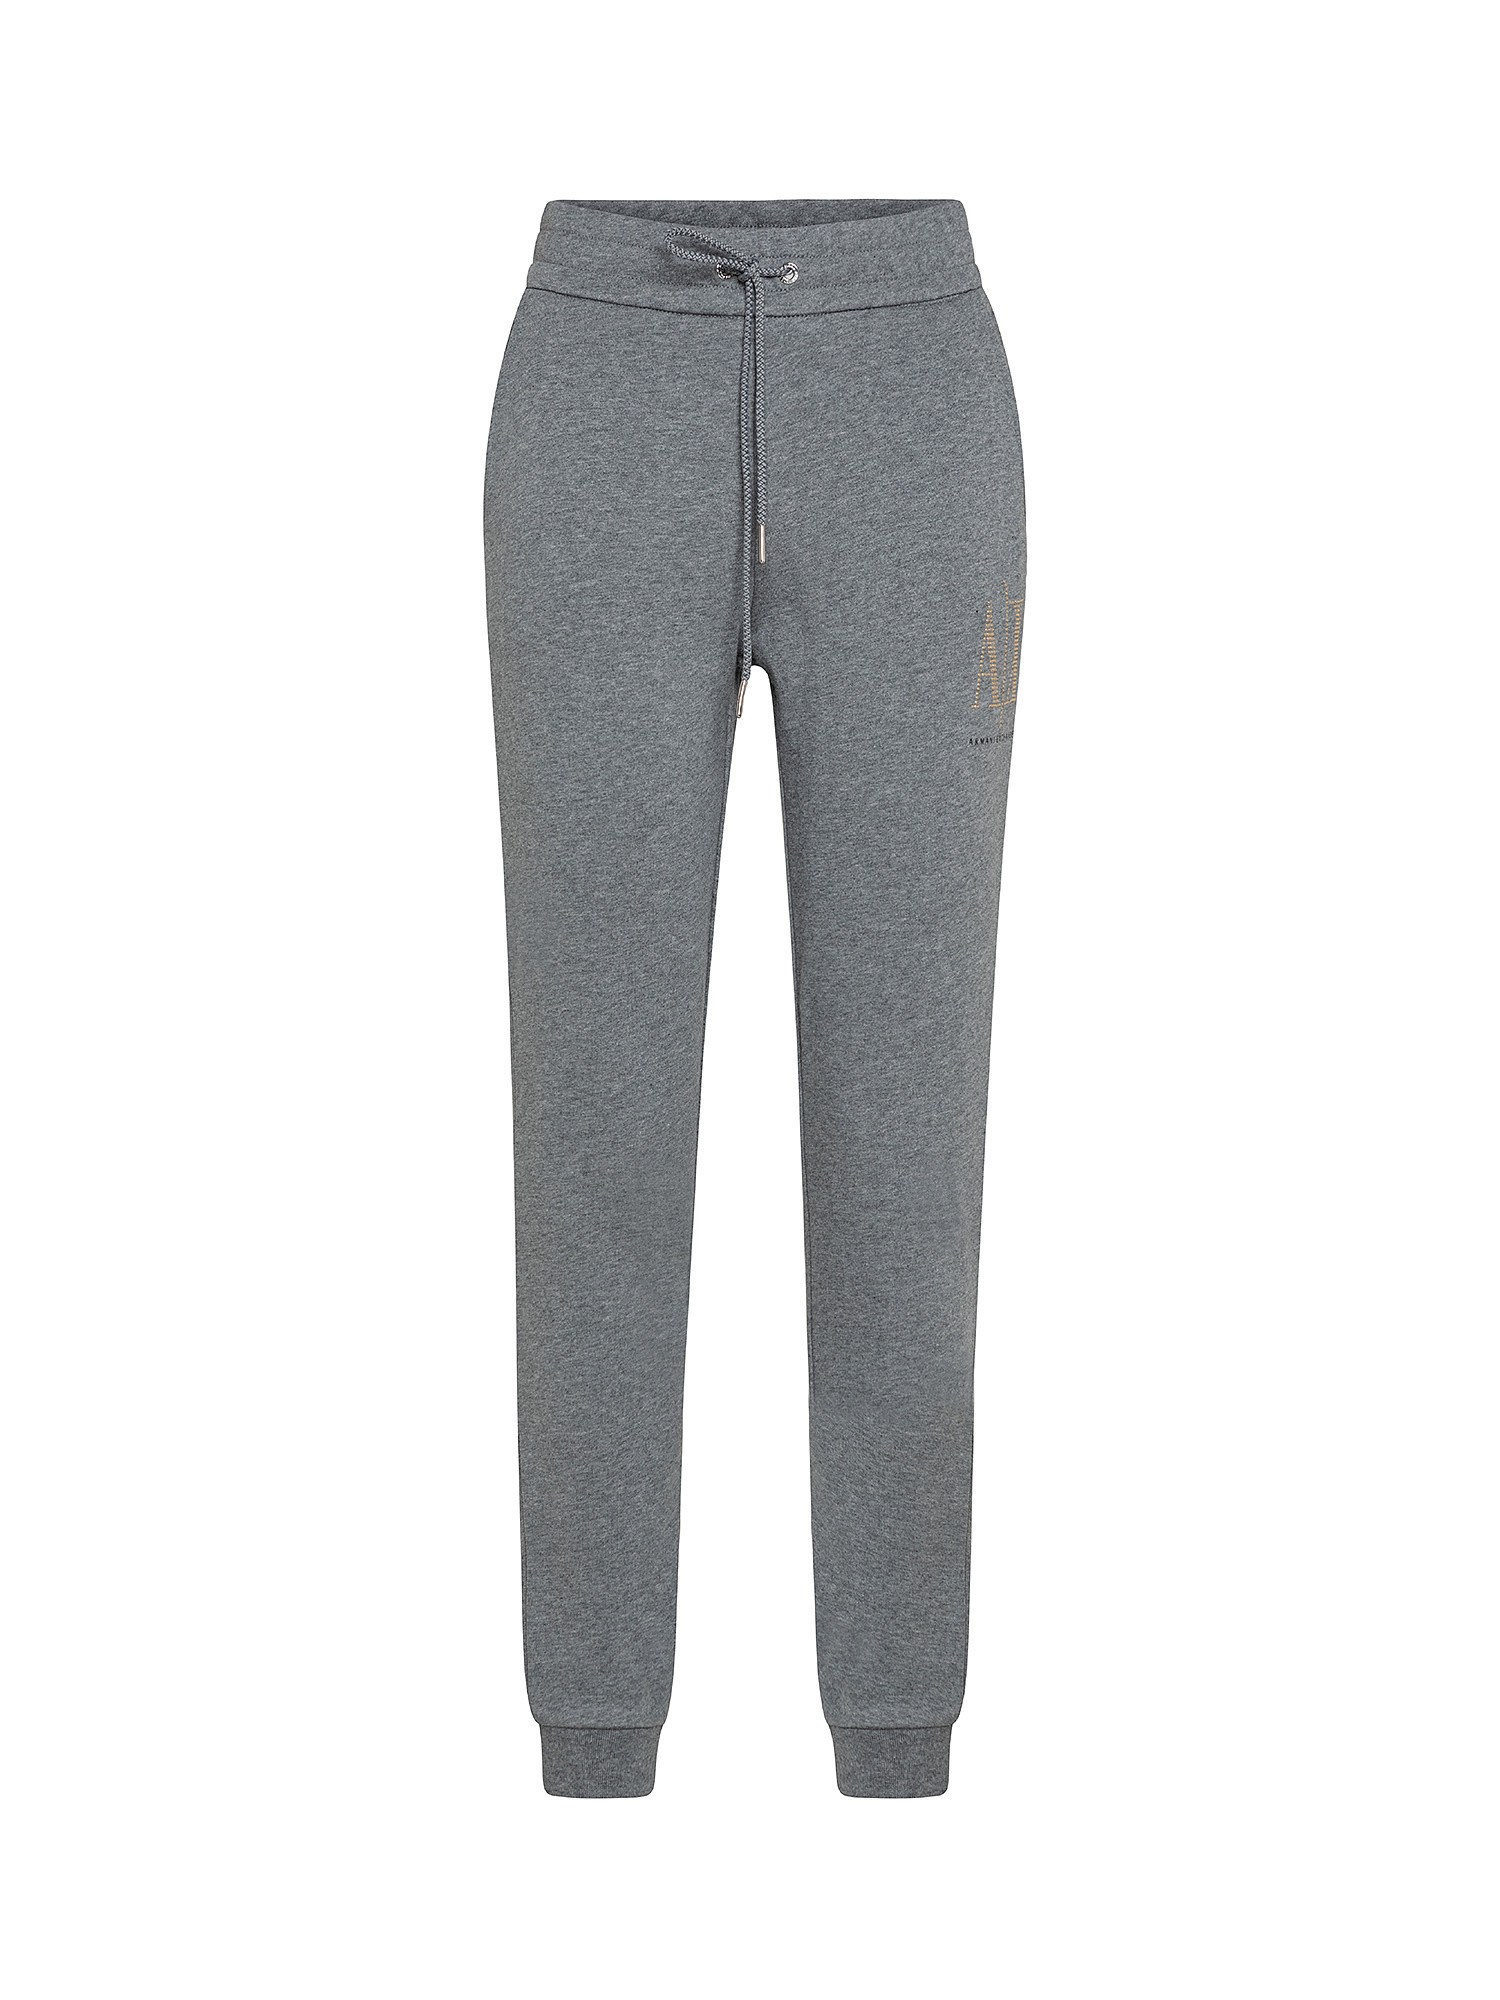 Trousers, Grey, large image number 0